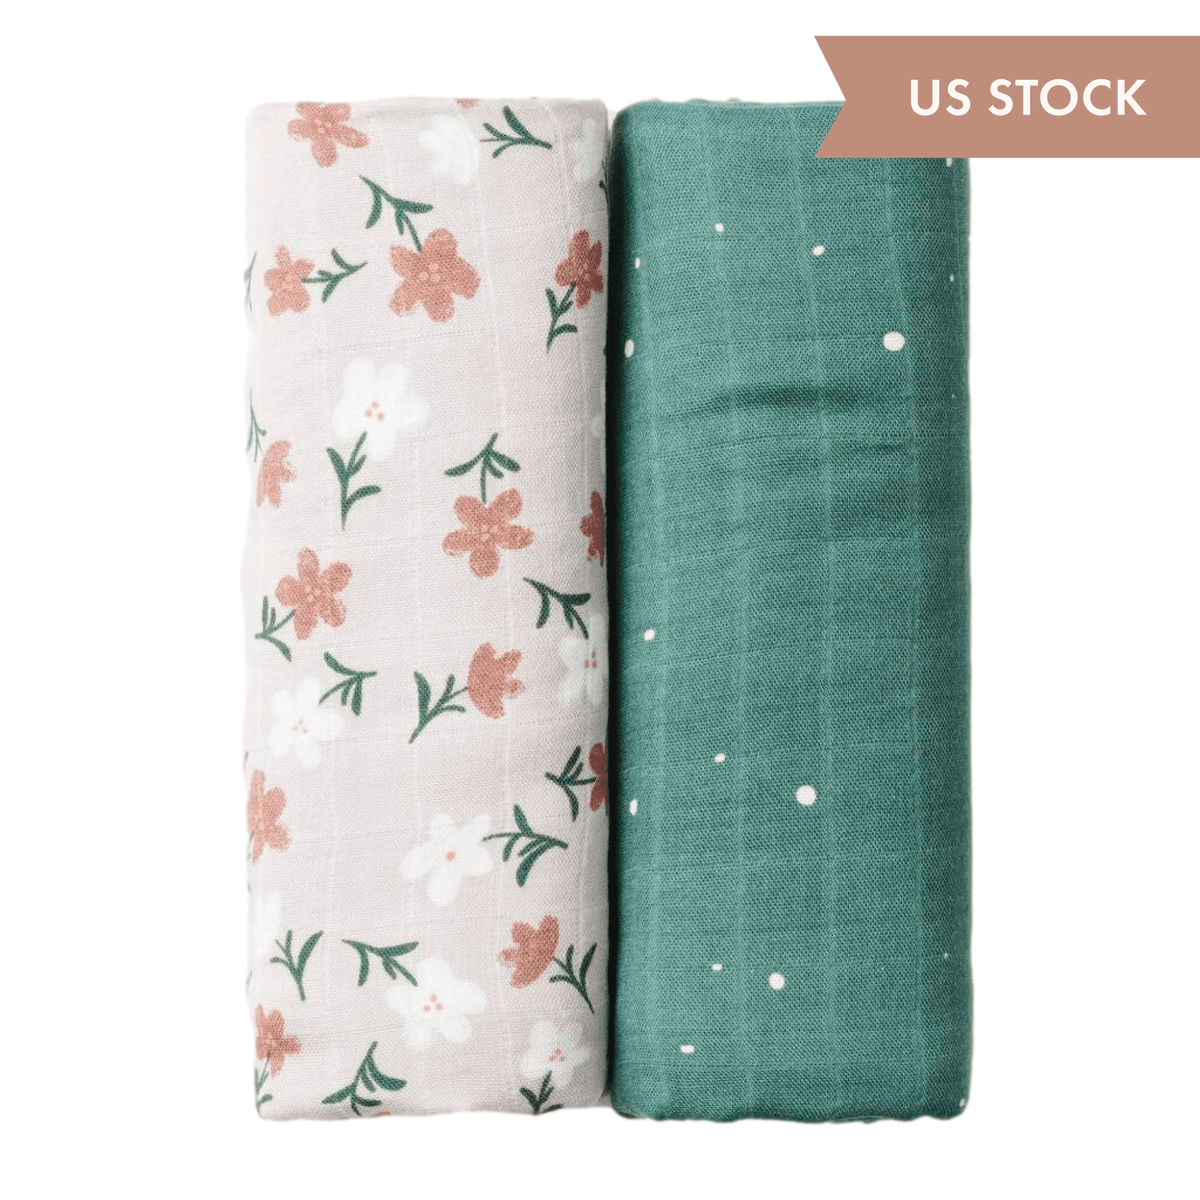 Muslin Swaddle Blankets - Pack of 2 - Starry/Floral/Stripes